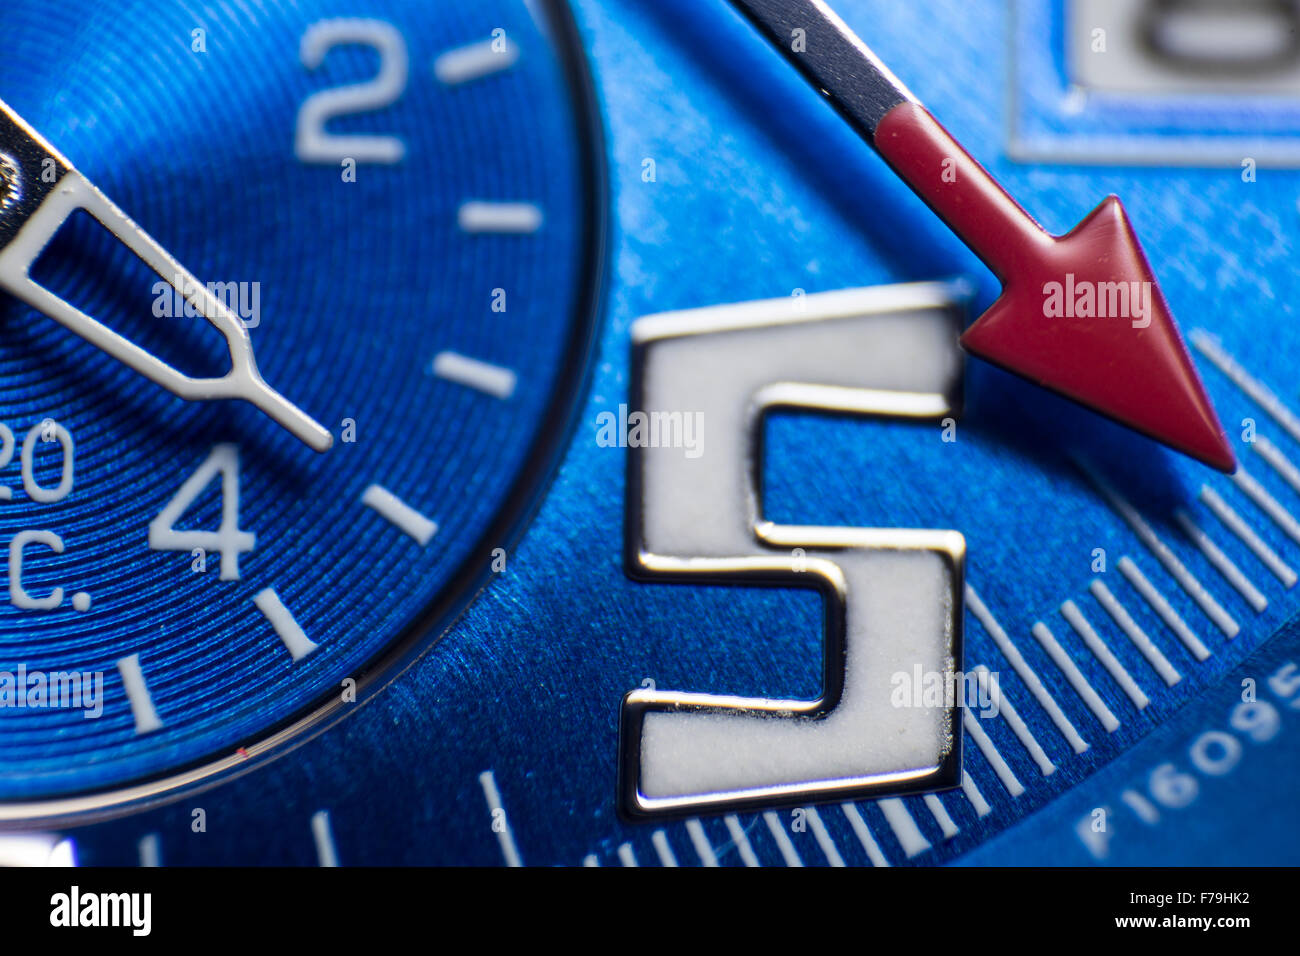 detail on top of a blue wristwatch Stock Photo